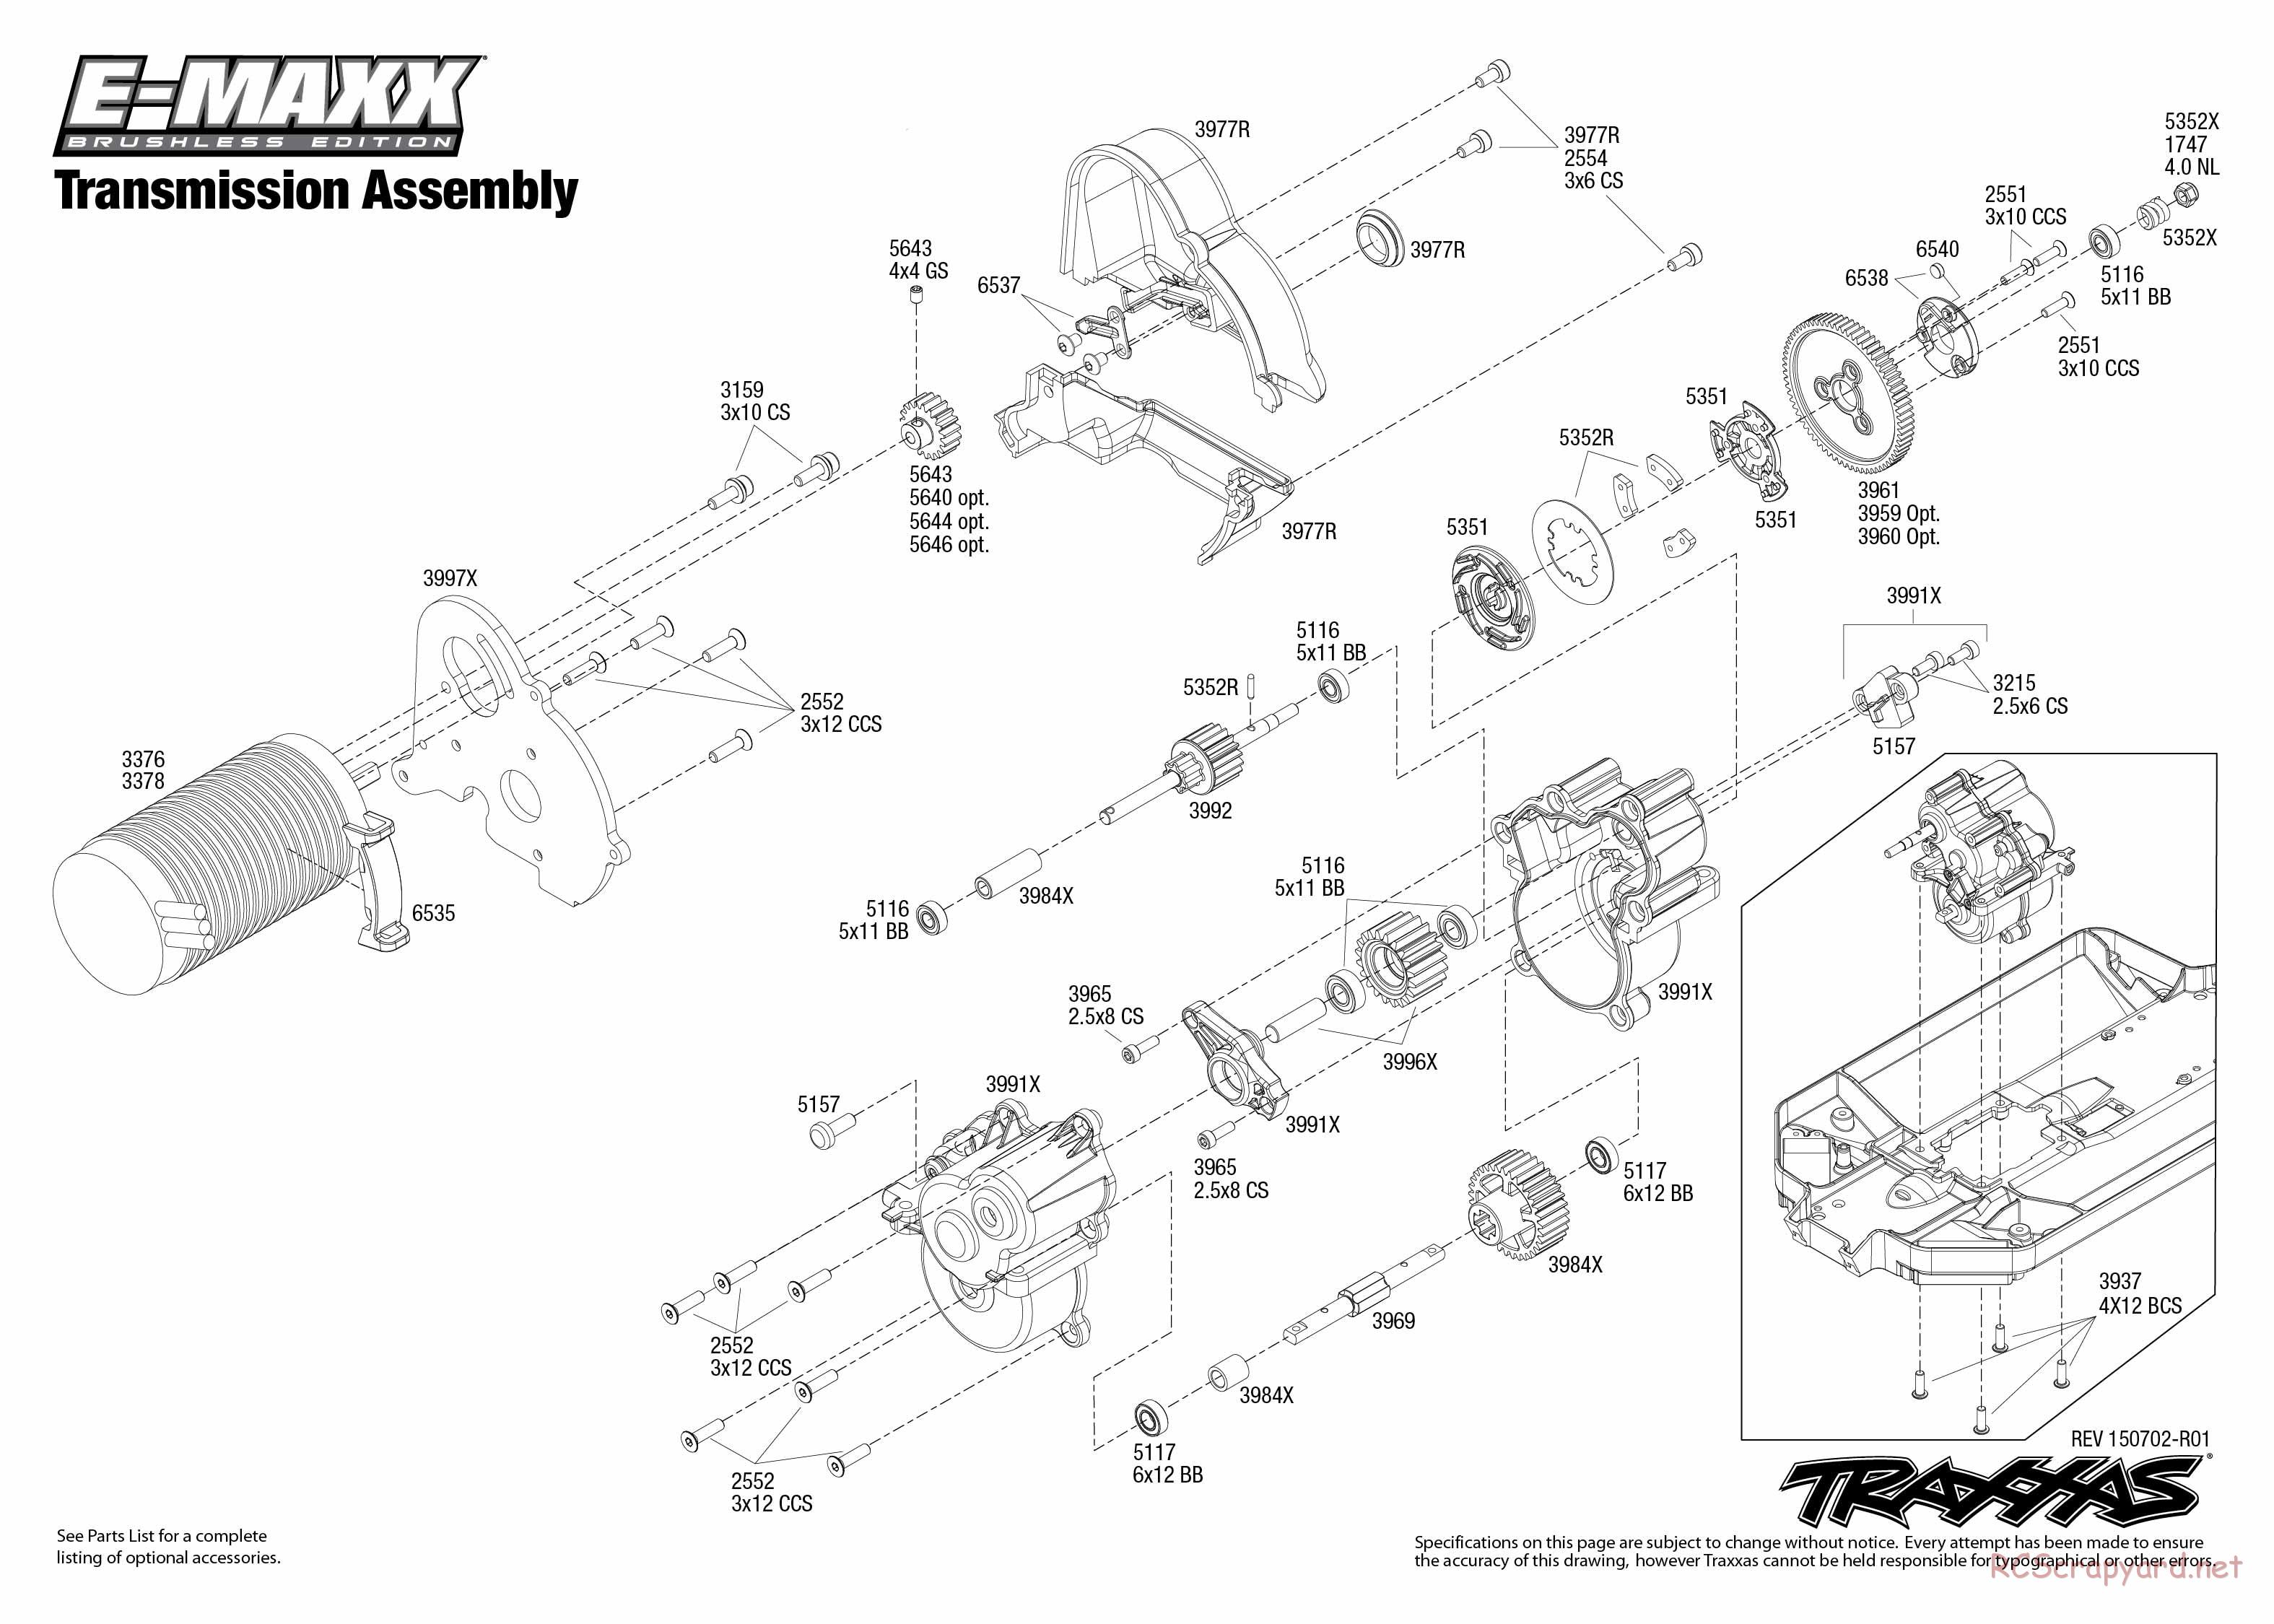 Traxxas - E-Maxx Brushless (2015) - Exploded Views - Page 4